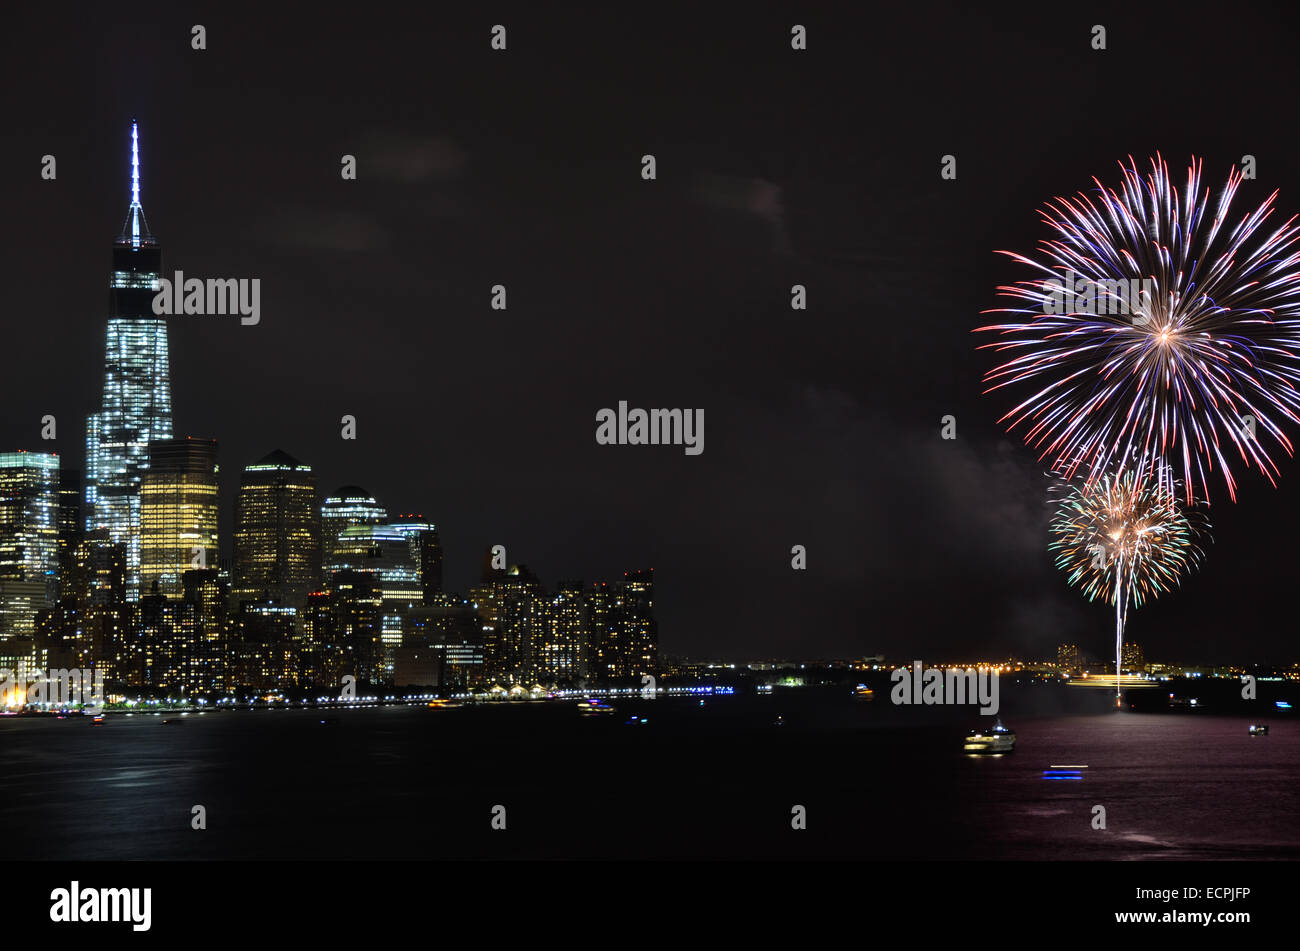 Fireworks celebrating New York City's 2014 Gay Pride Parade explode over lower Manhattan's Freedom Tower. Stock Photo